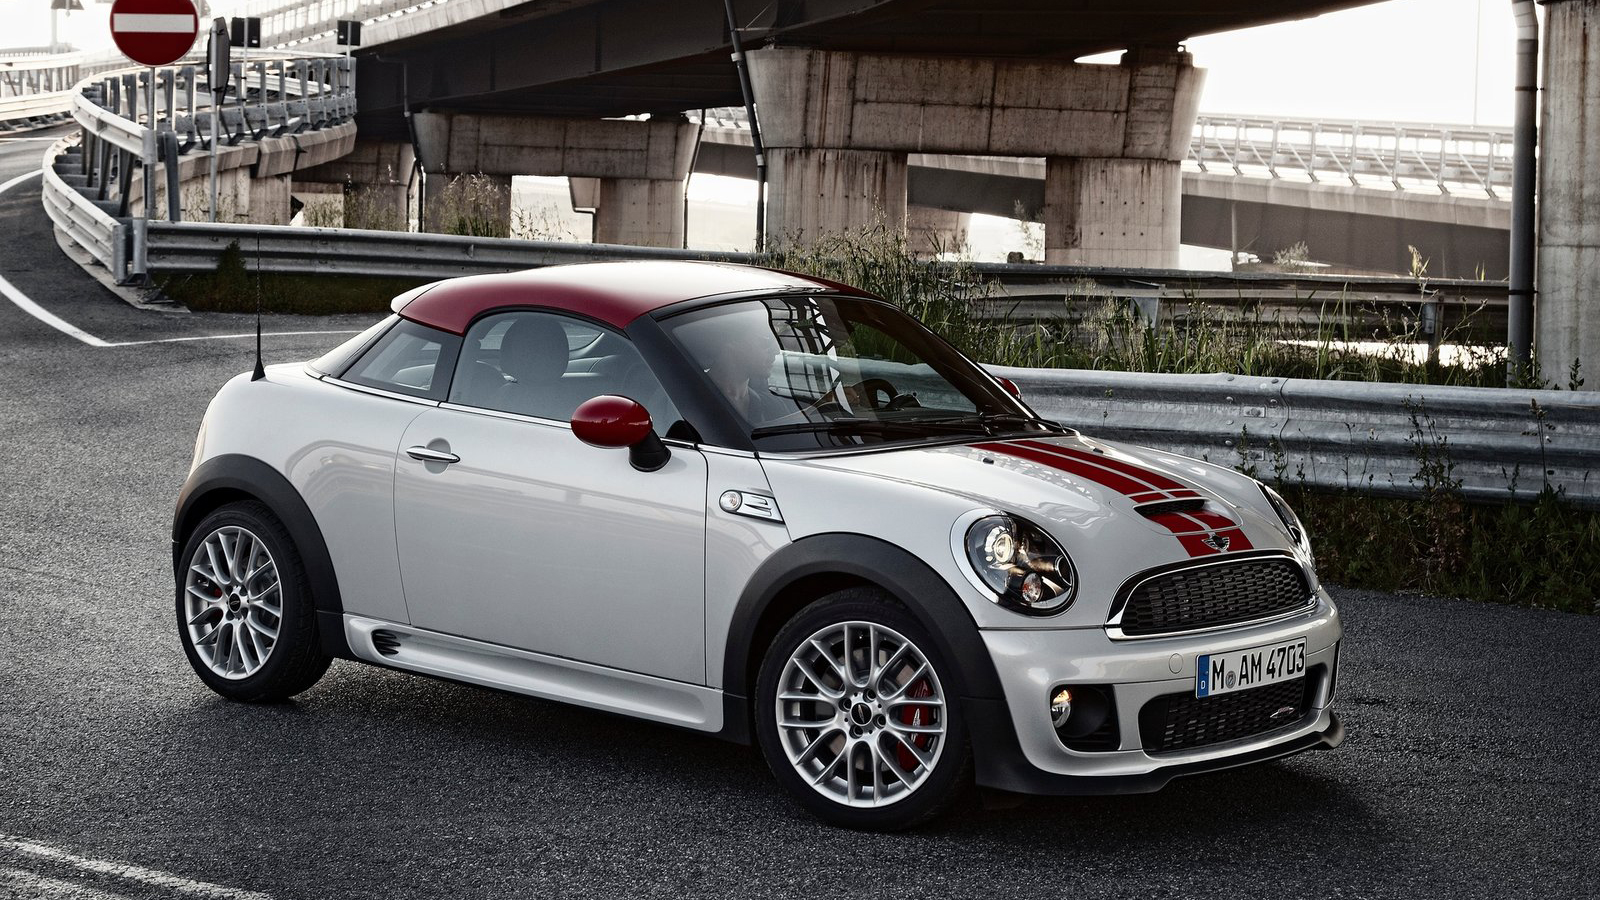 Top Gear's guilty pleasures: the Mini Coupe | Top Gear